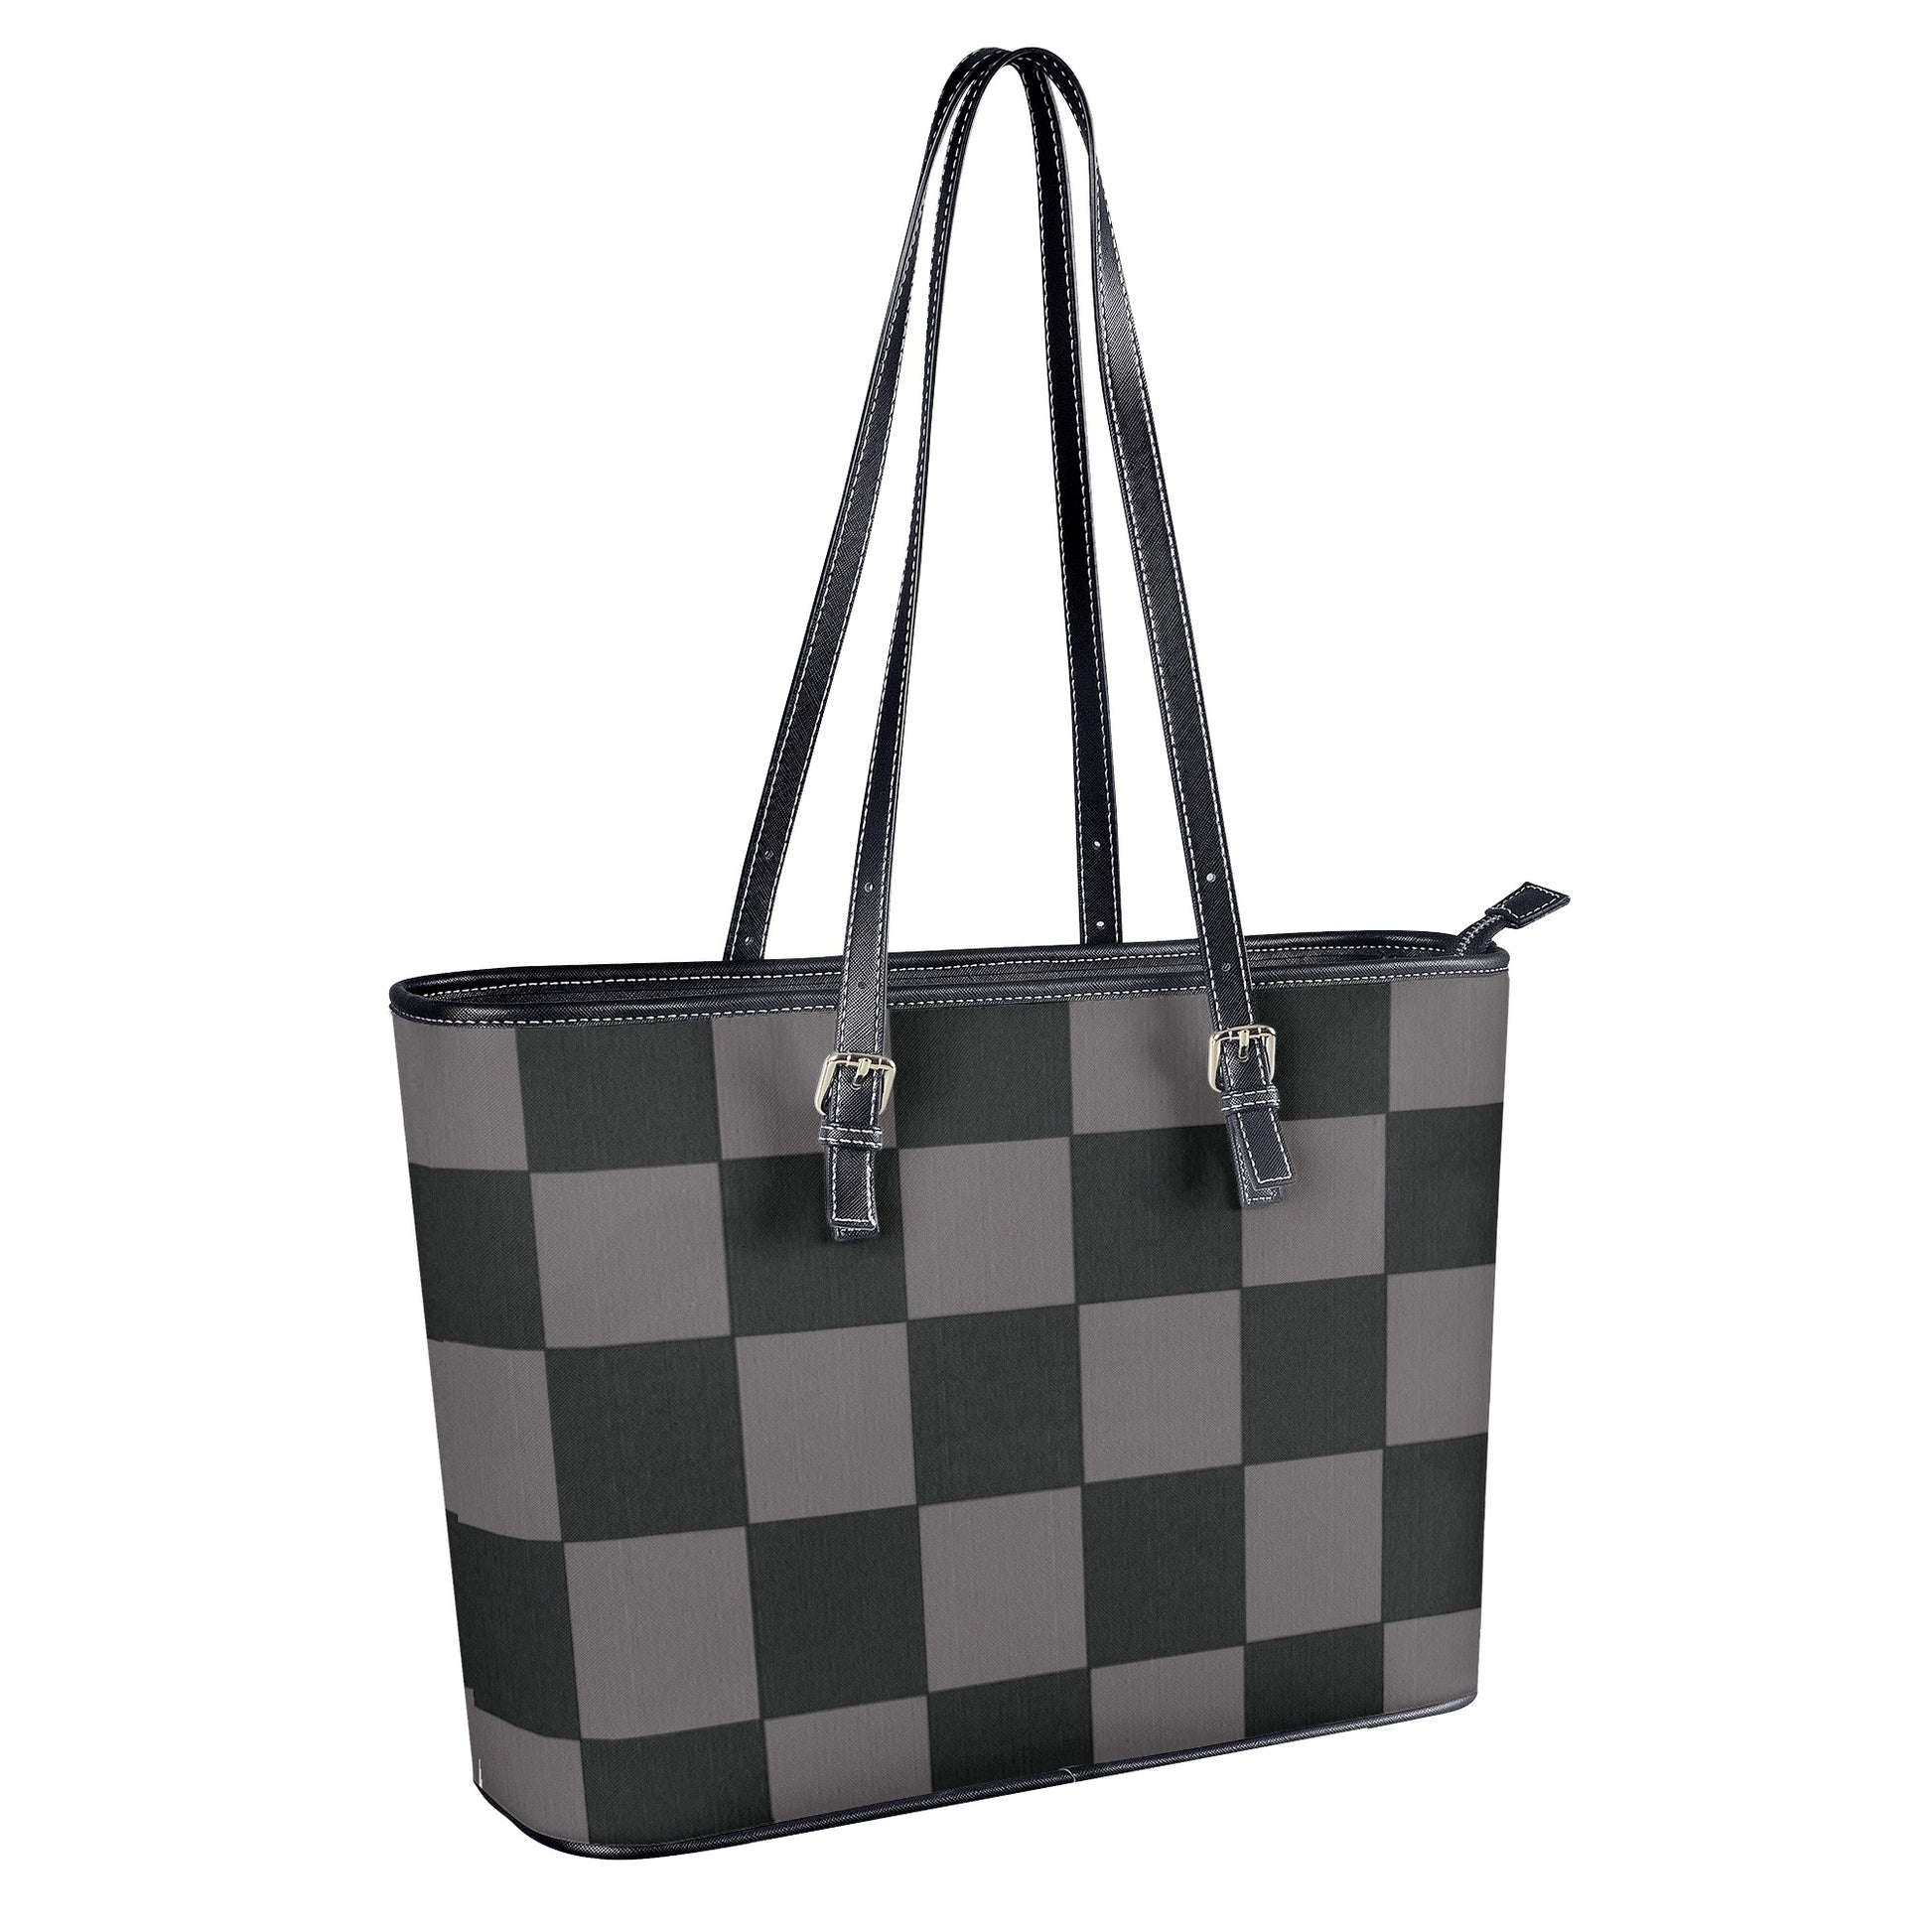 Classic Plaid Design Hand Held Business Luggage Travel Bag Tote Bag